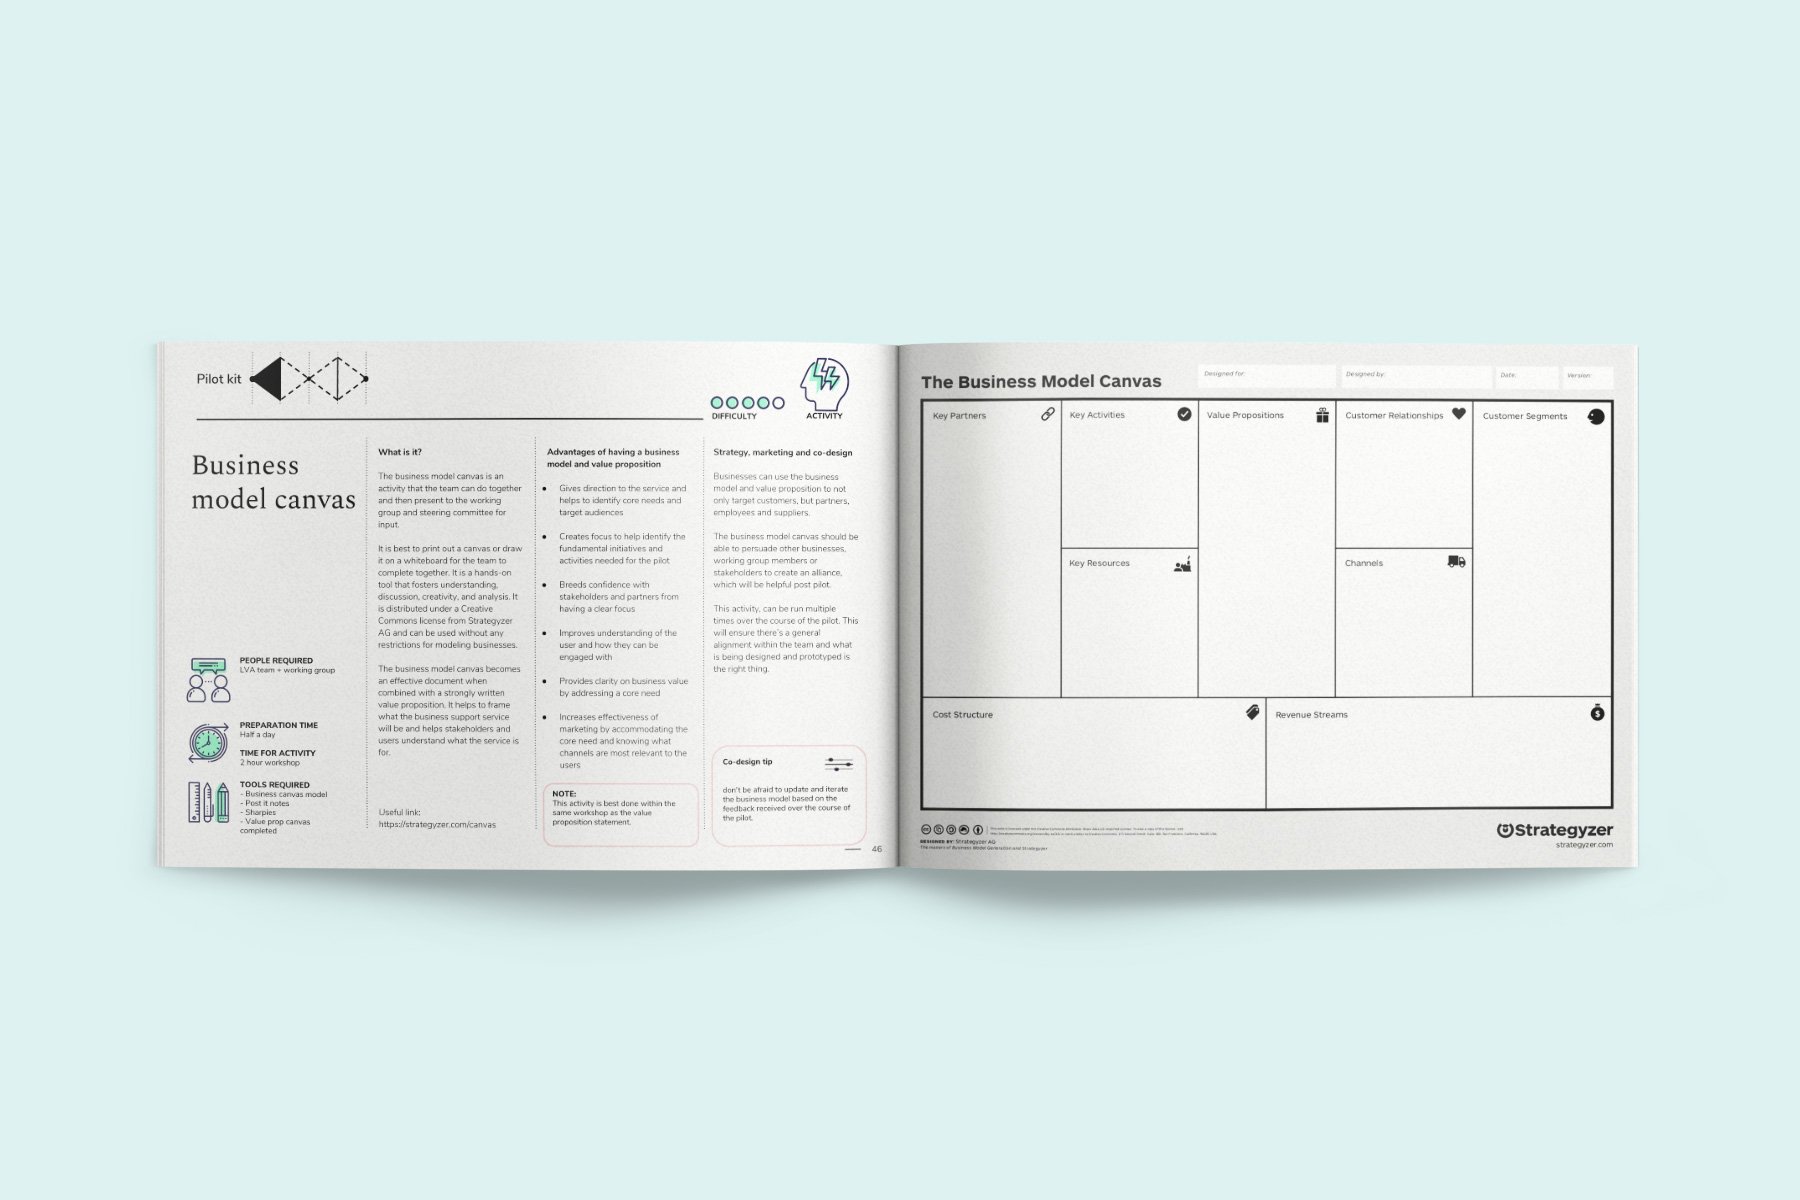 An example of one of the tools documented in the HCD toolkit called the Business Model Canvas. The canvas is on the right and the instructions for how to use it are on the left.